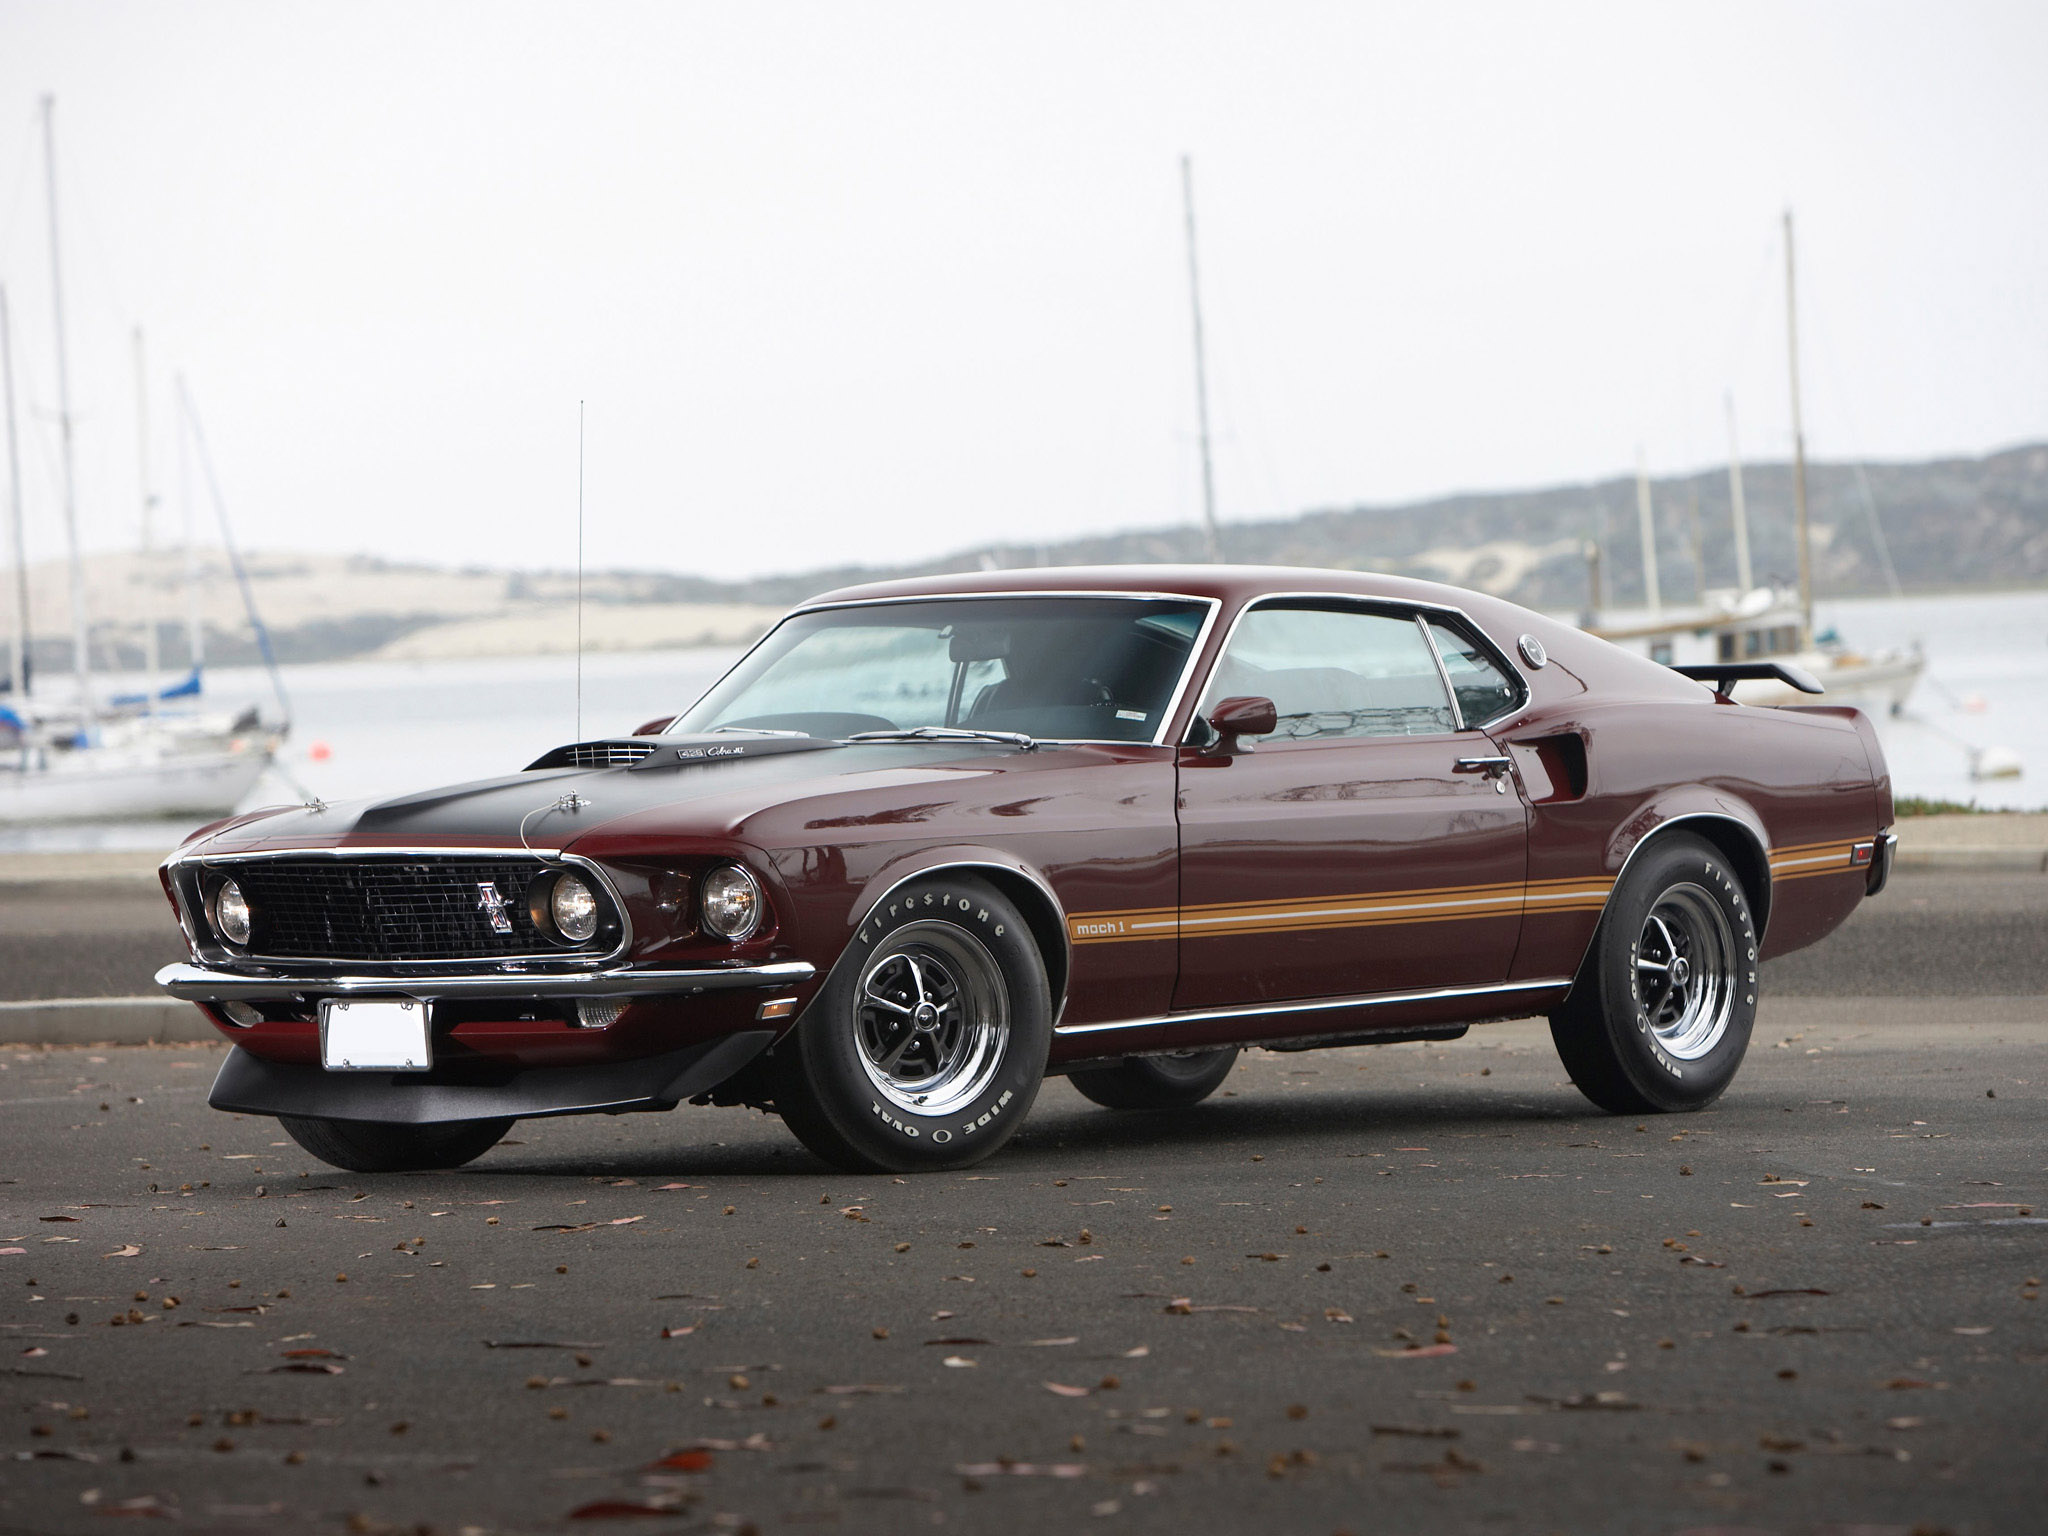 HQ Ford Mustang Mach 1 Wallpapers | File 396.91Kb